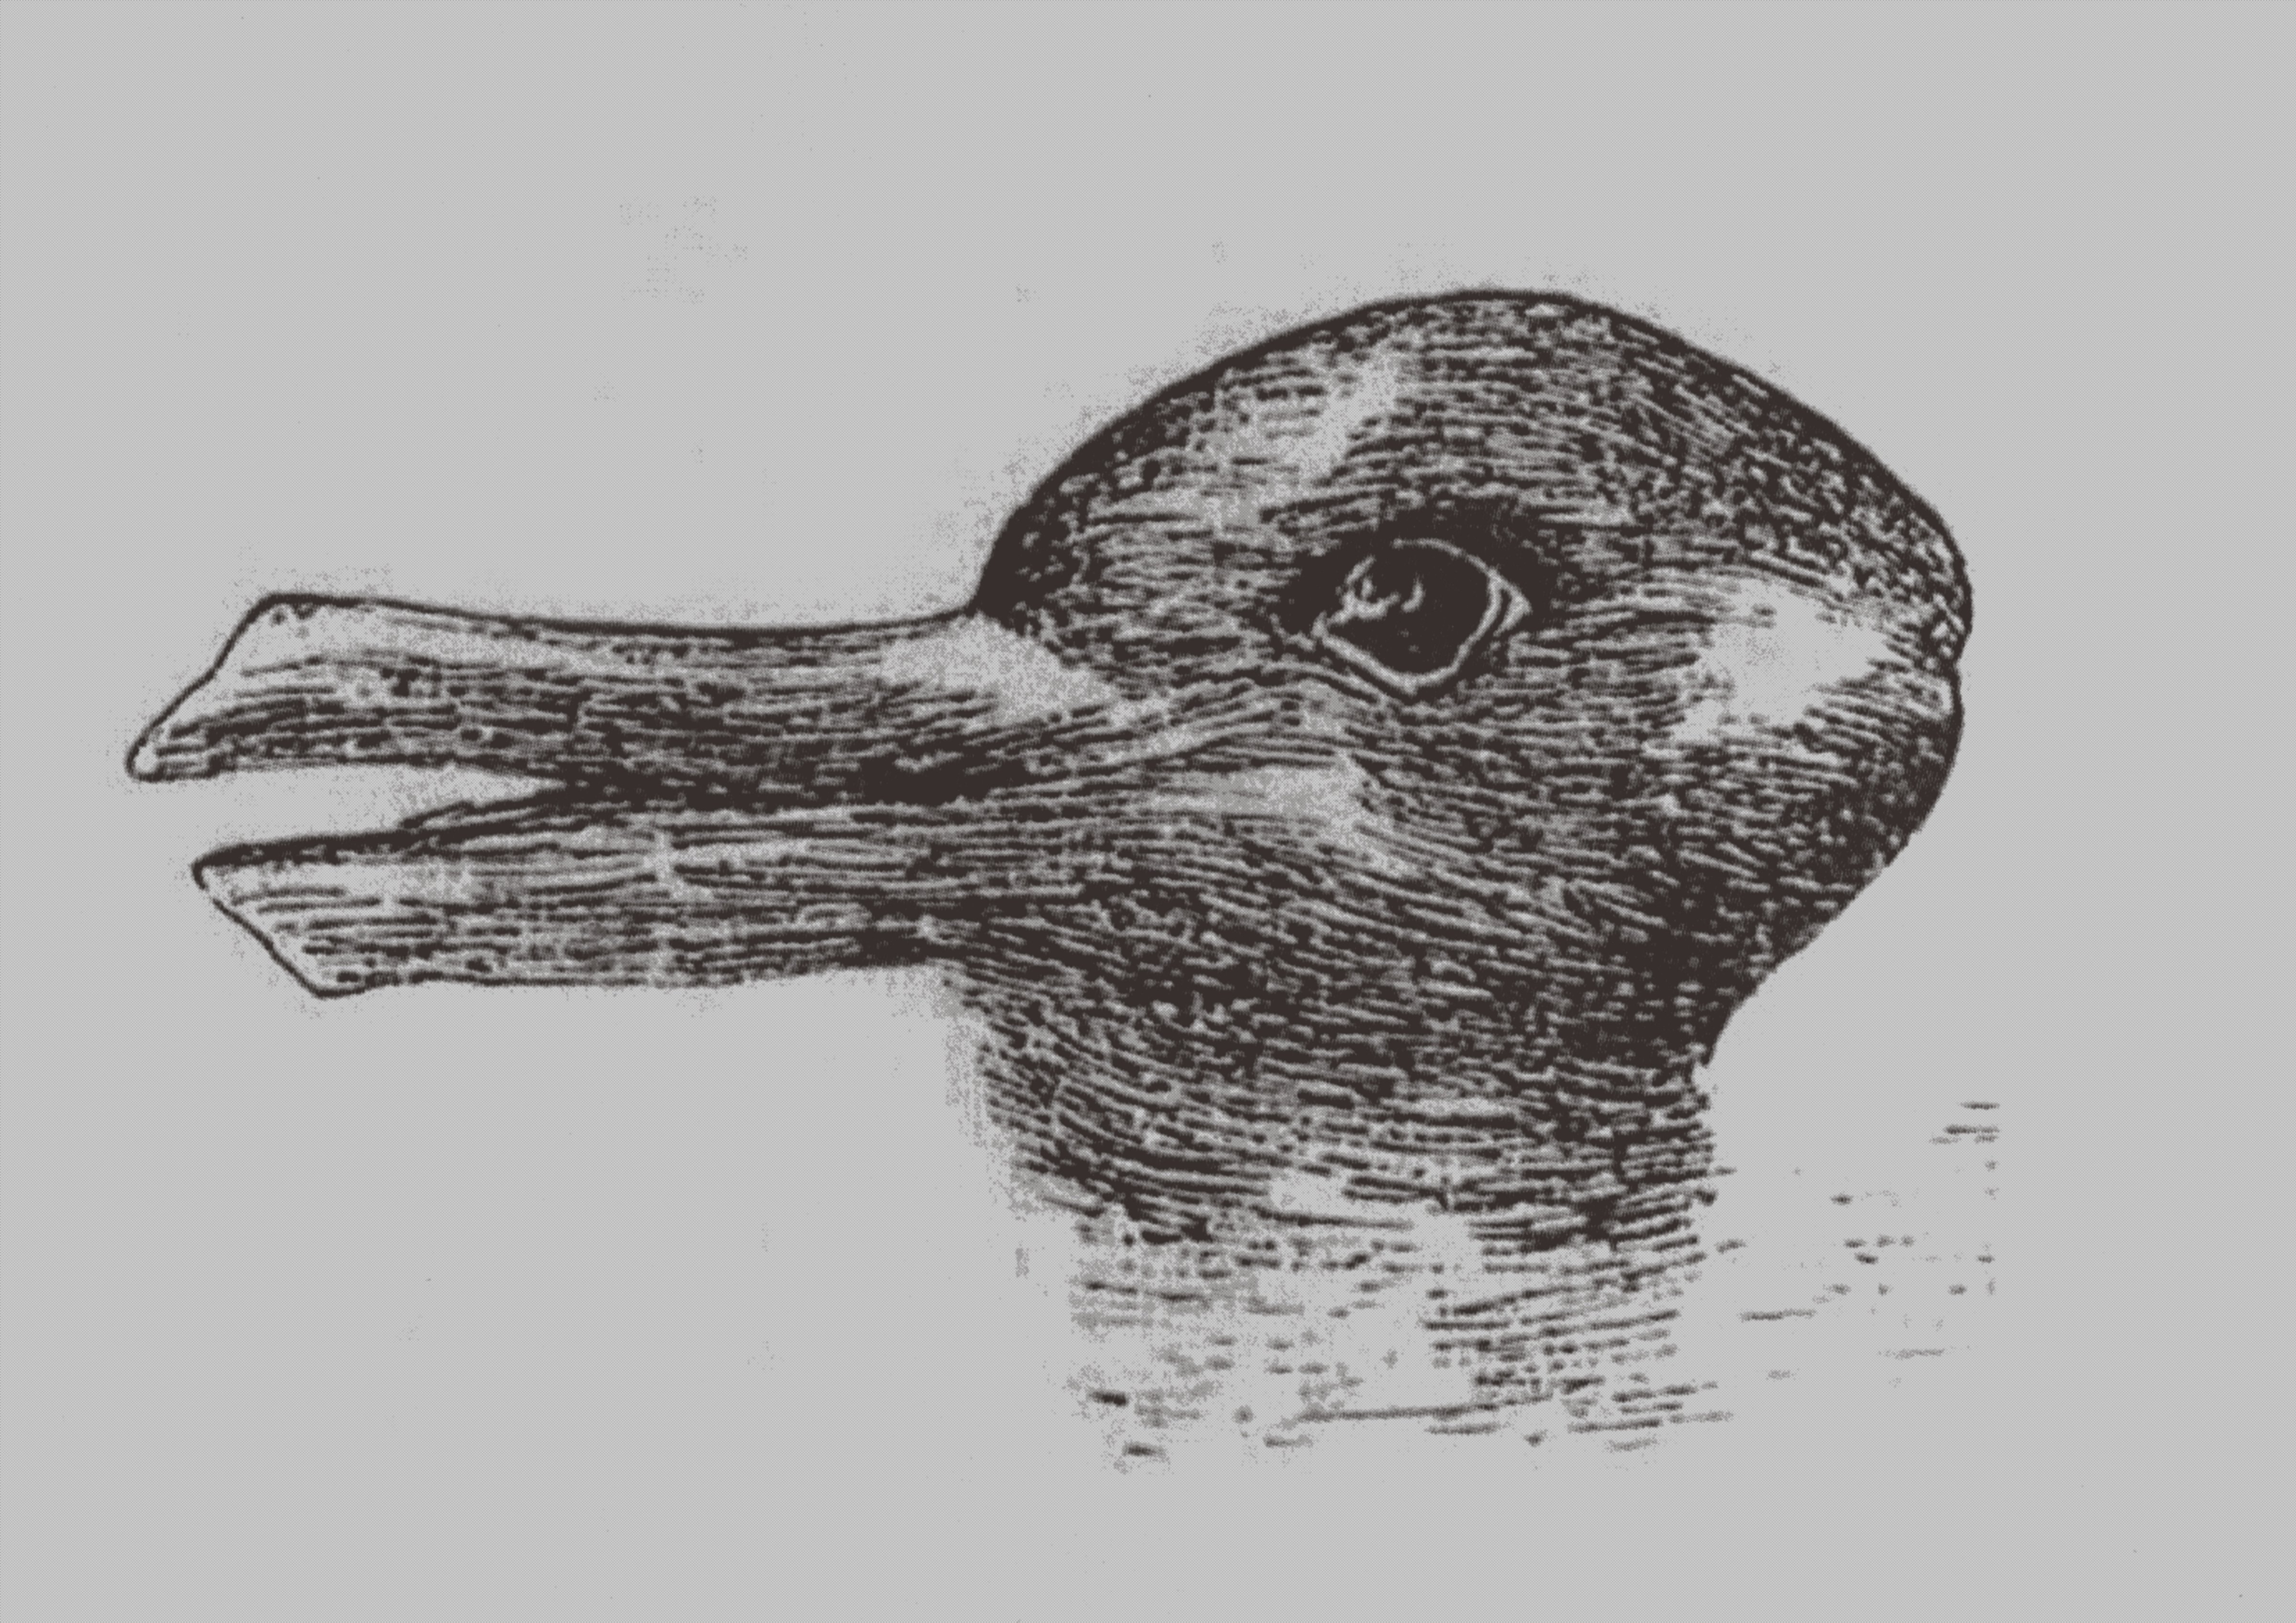 Duck-Rabbit illusion. From: Jastrow, J. The mind's eye. Popular Science Monthly, 1899. (Heritage Images/Getty Images)